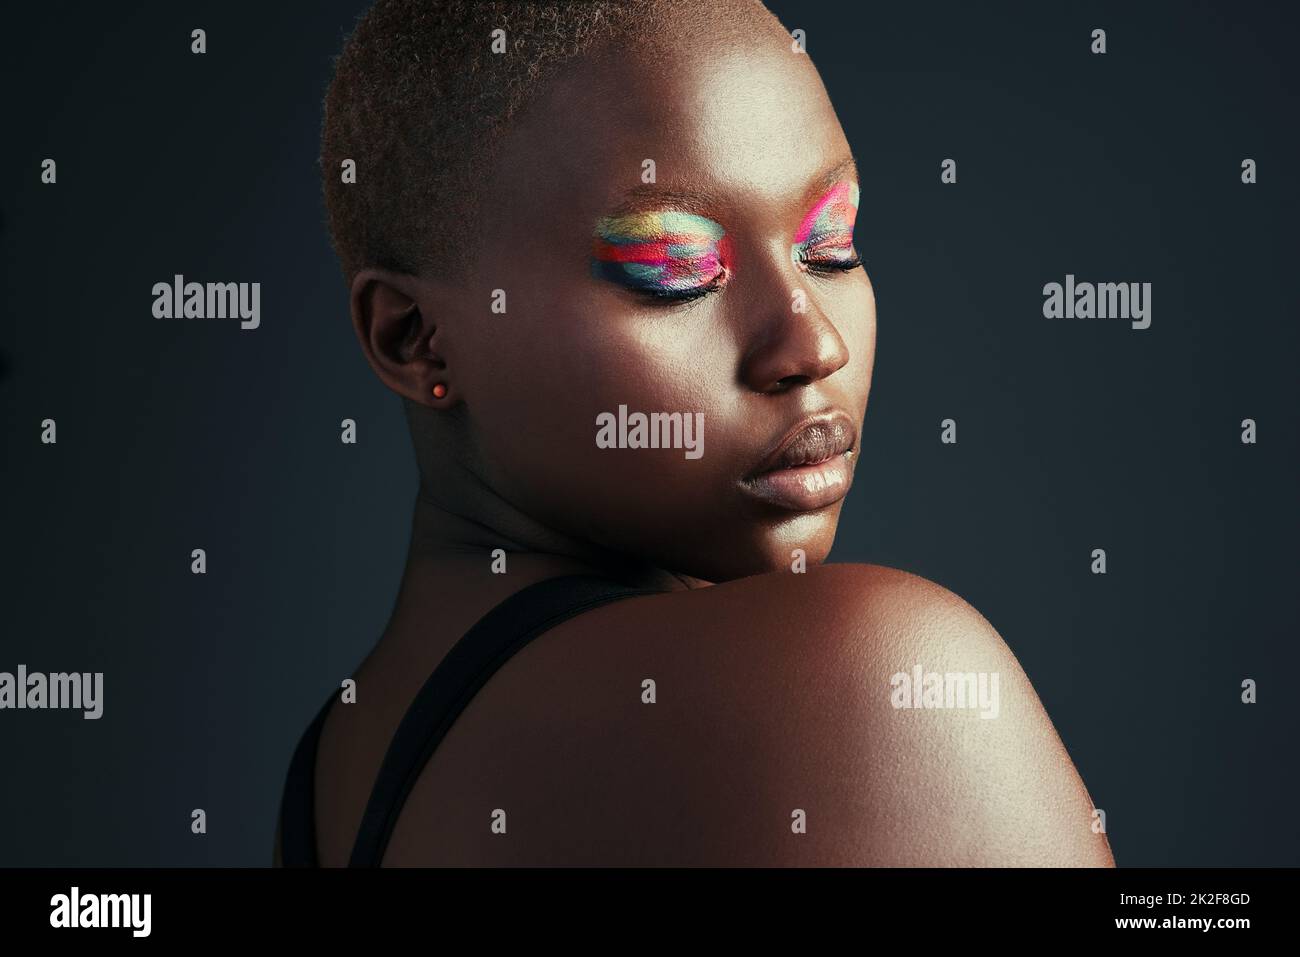 Be different, be unique. Cropped shot of a beautiful woman wearing colorful eyeshadow while posing against a grey background. Stock Photo